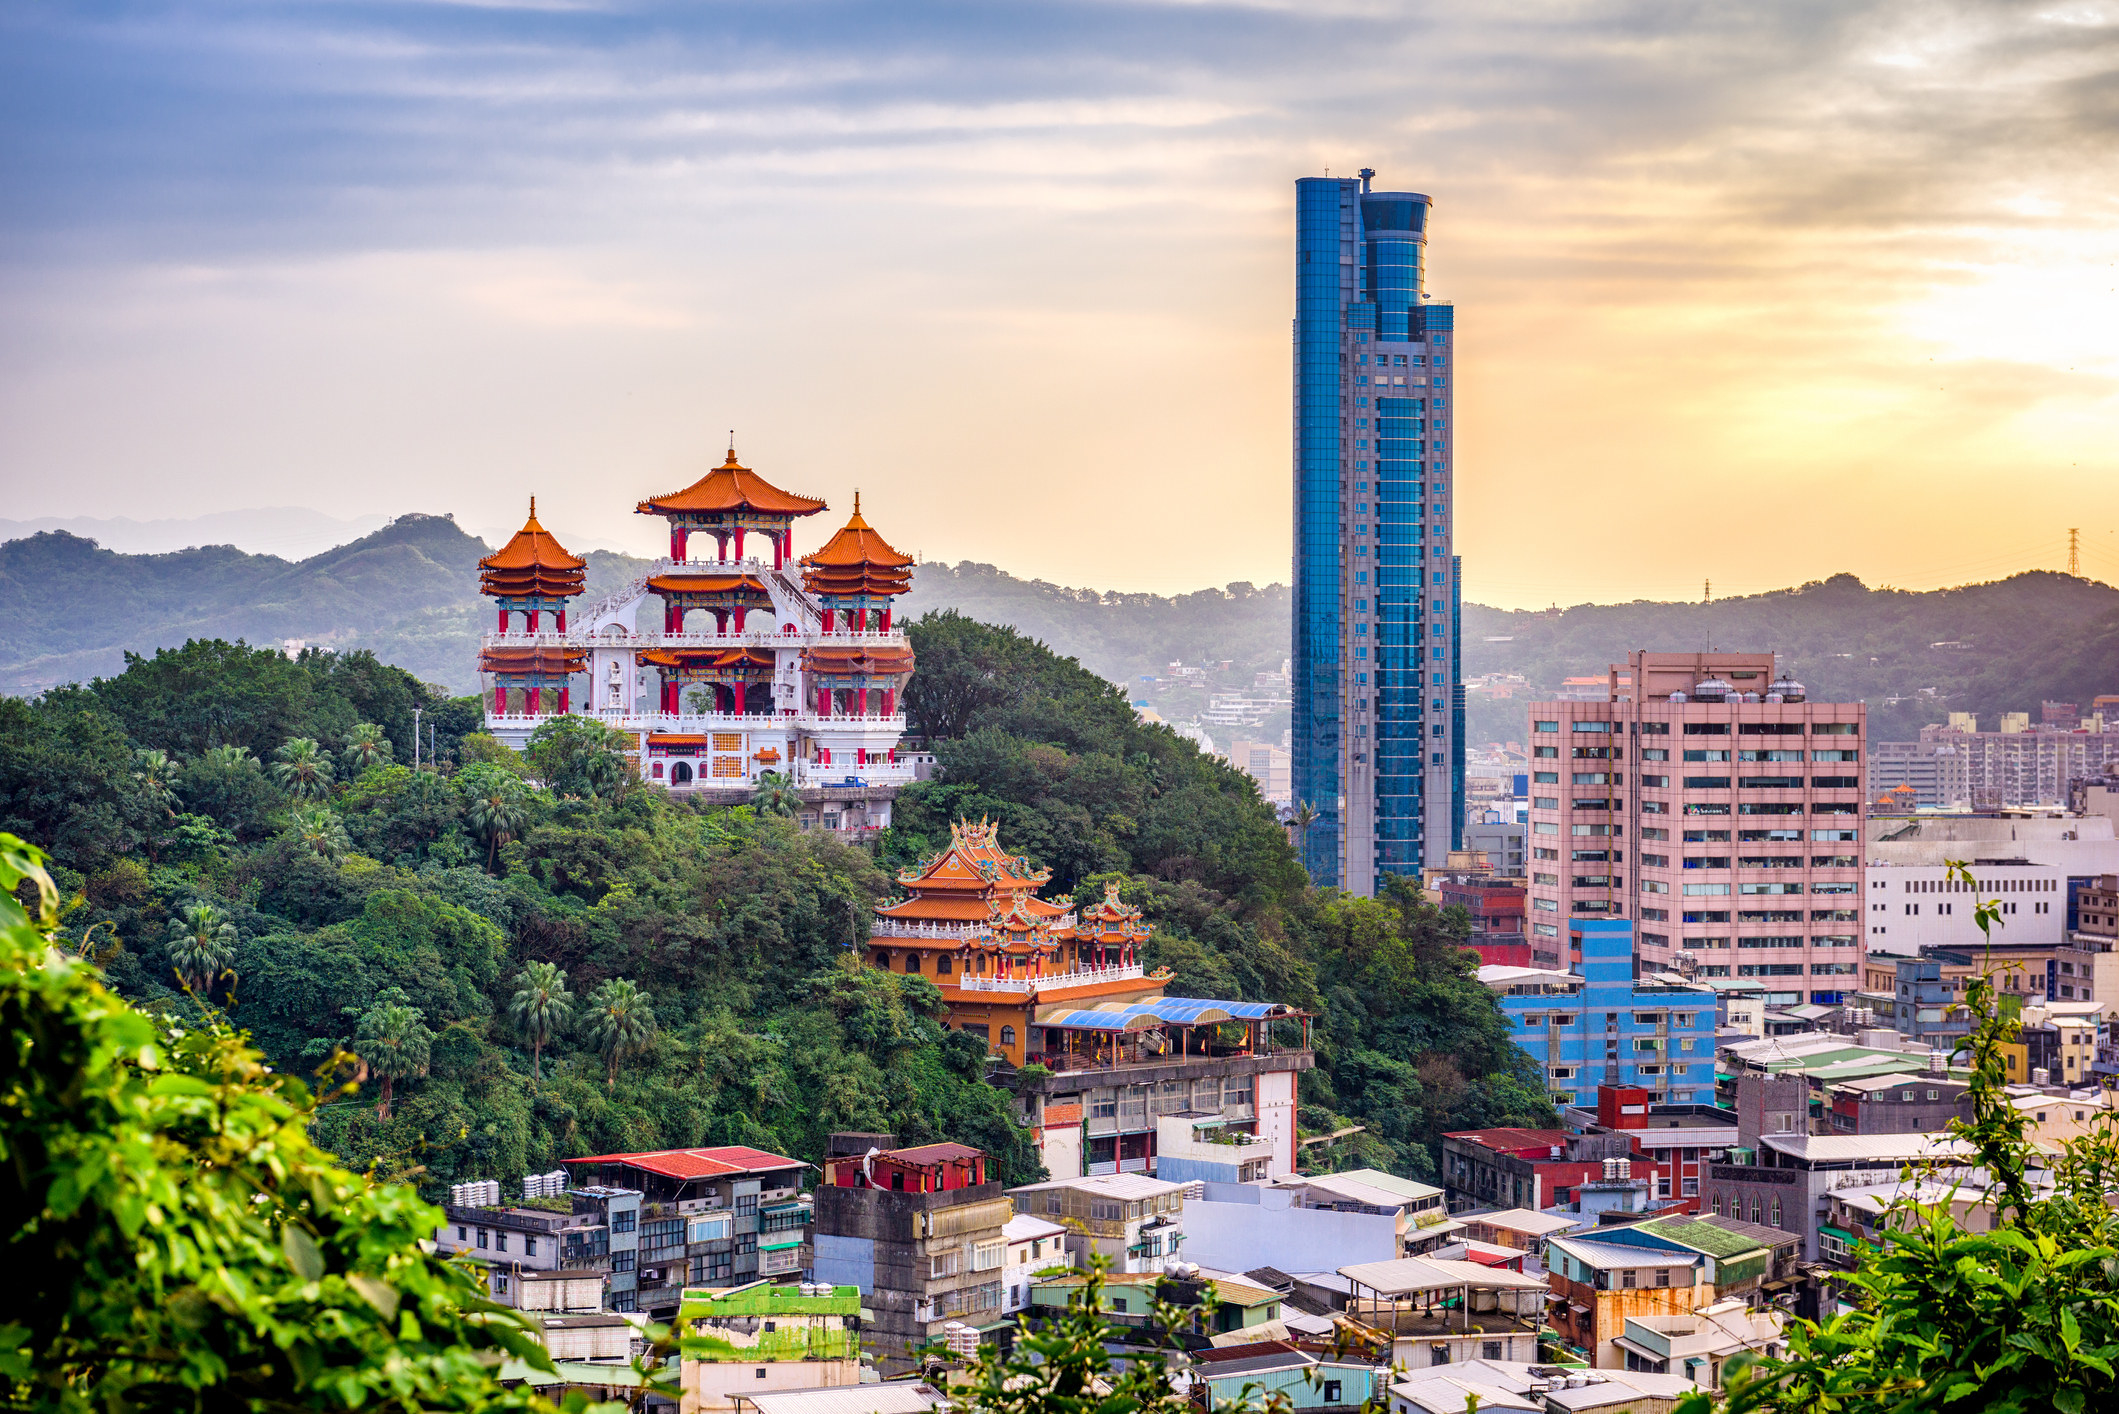 A cityscape of Keelung, Taiwan.